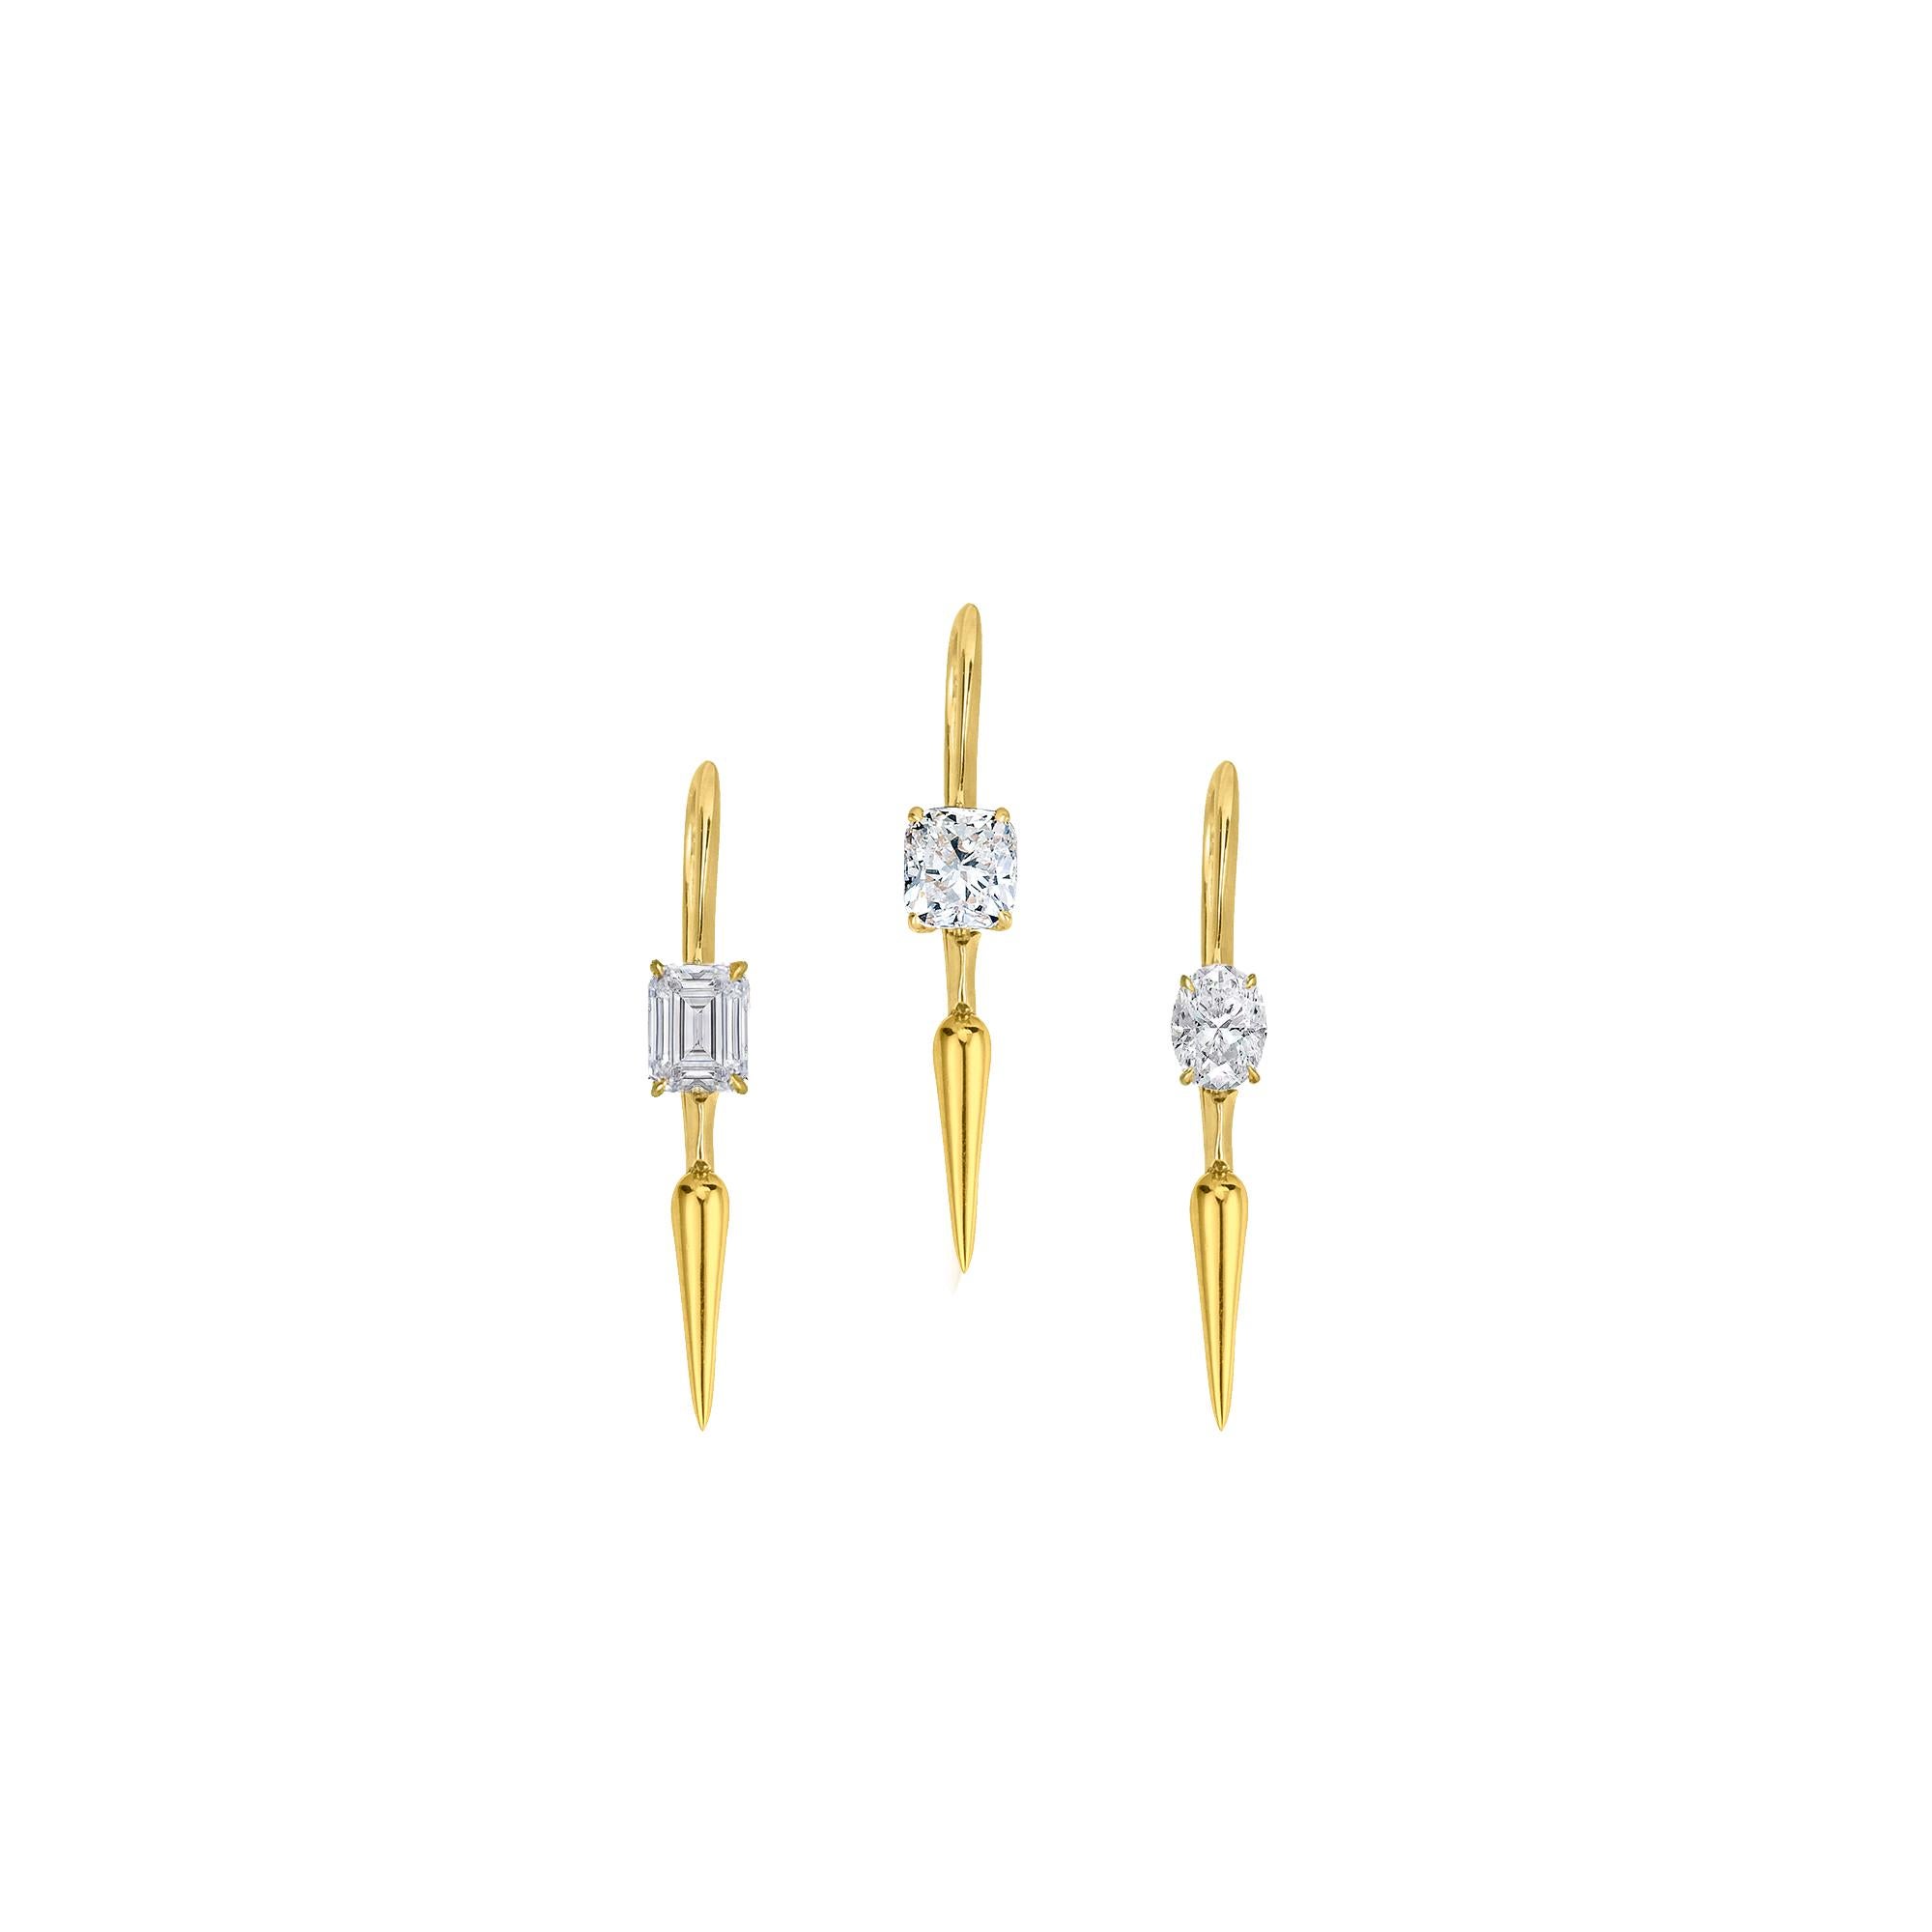 Sold as a SINGLE earring
14k recycled yellow gold
Ethical, unmined diamonds
Total weight: appx .25 carats
Length: 7/8